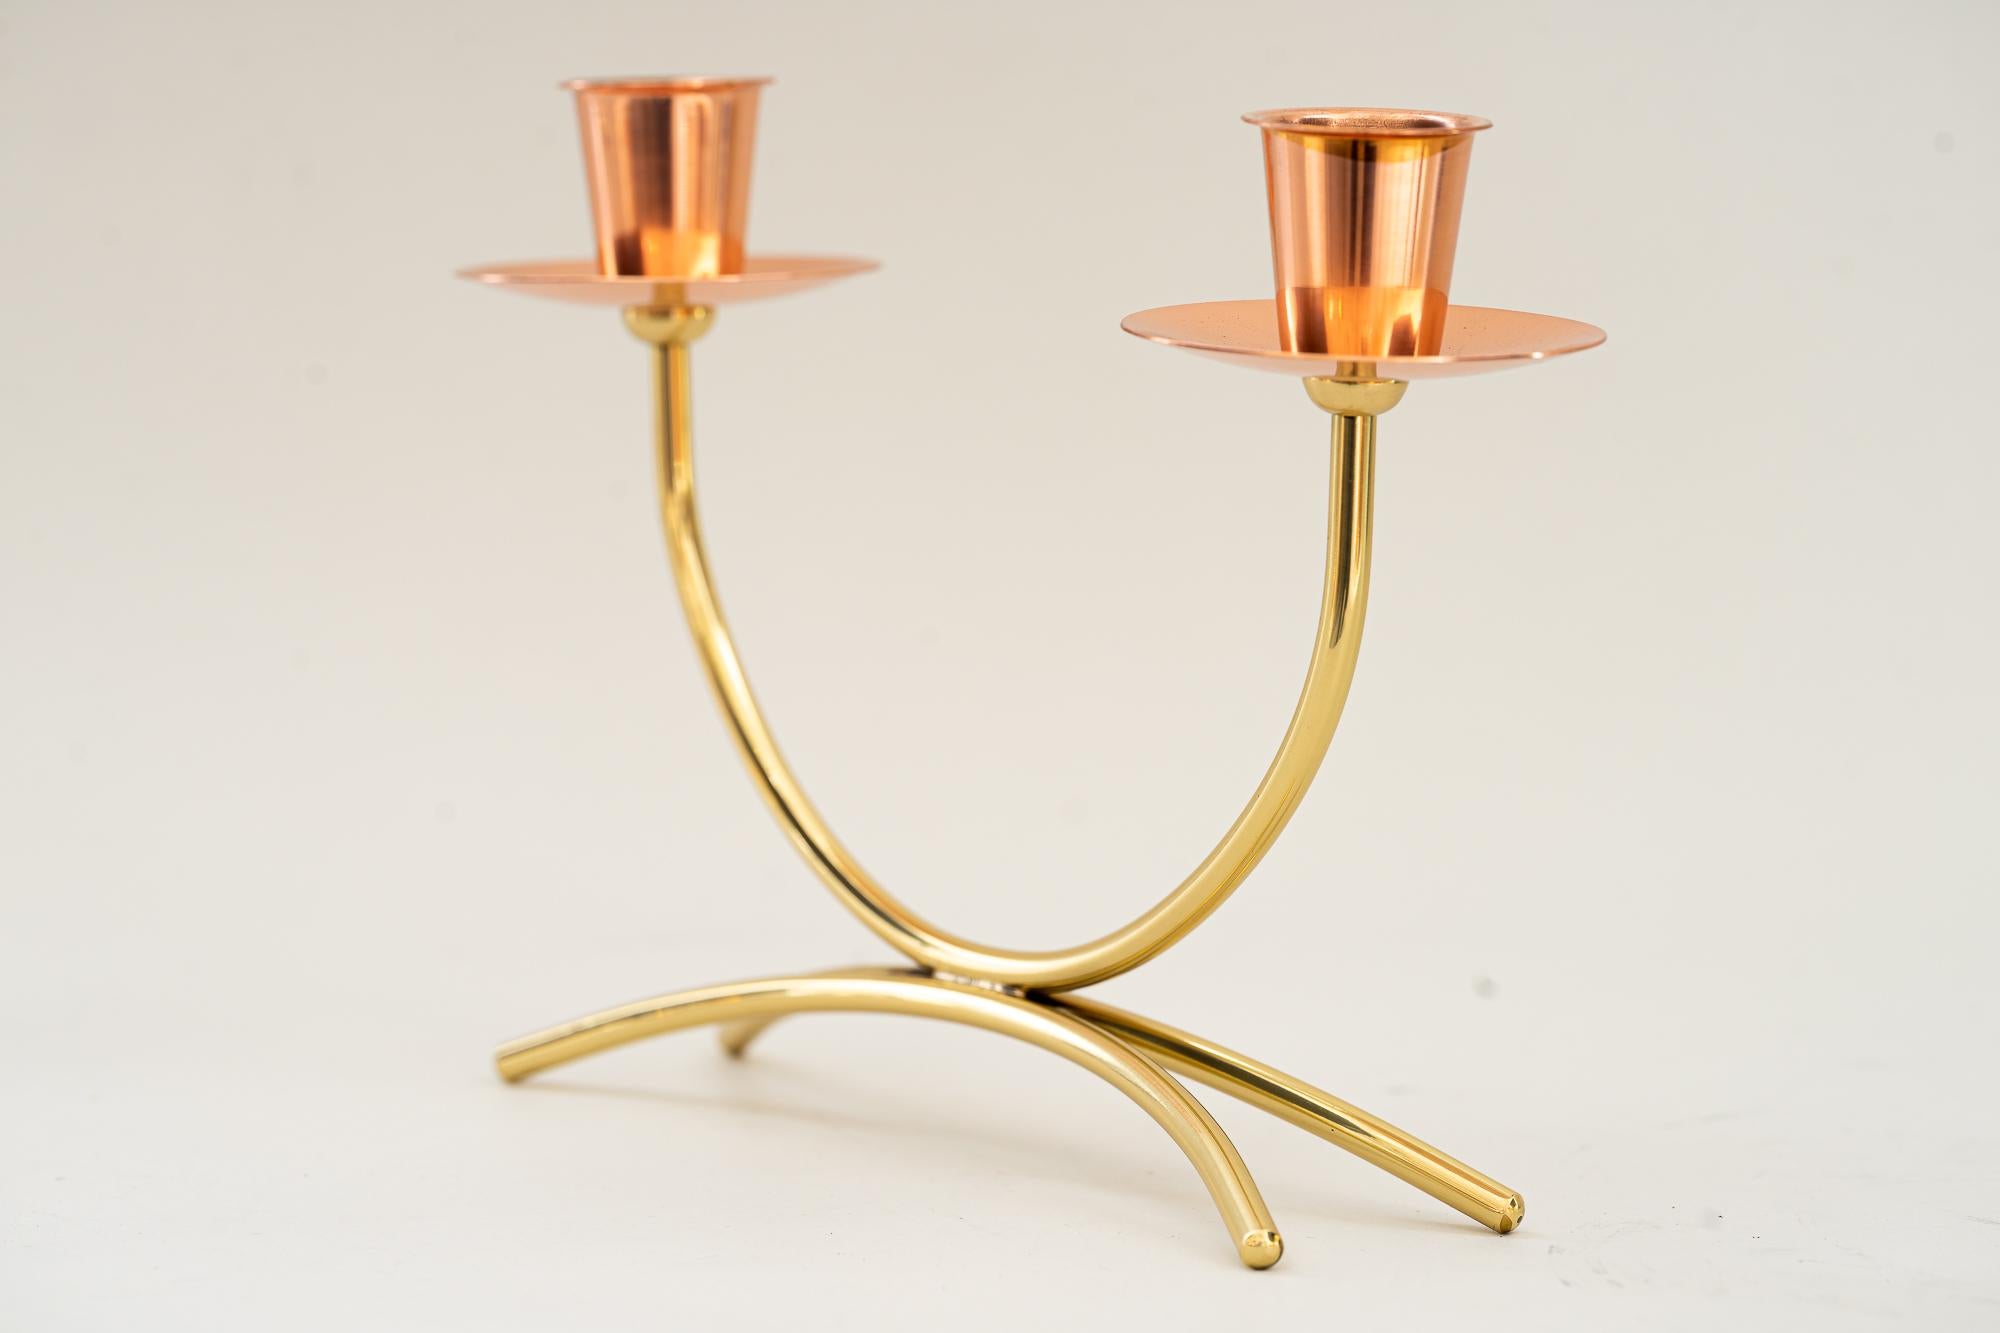 Candle holder brass, copper conbination around 1950s
Polished and stove enameled.